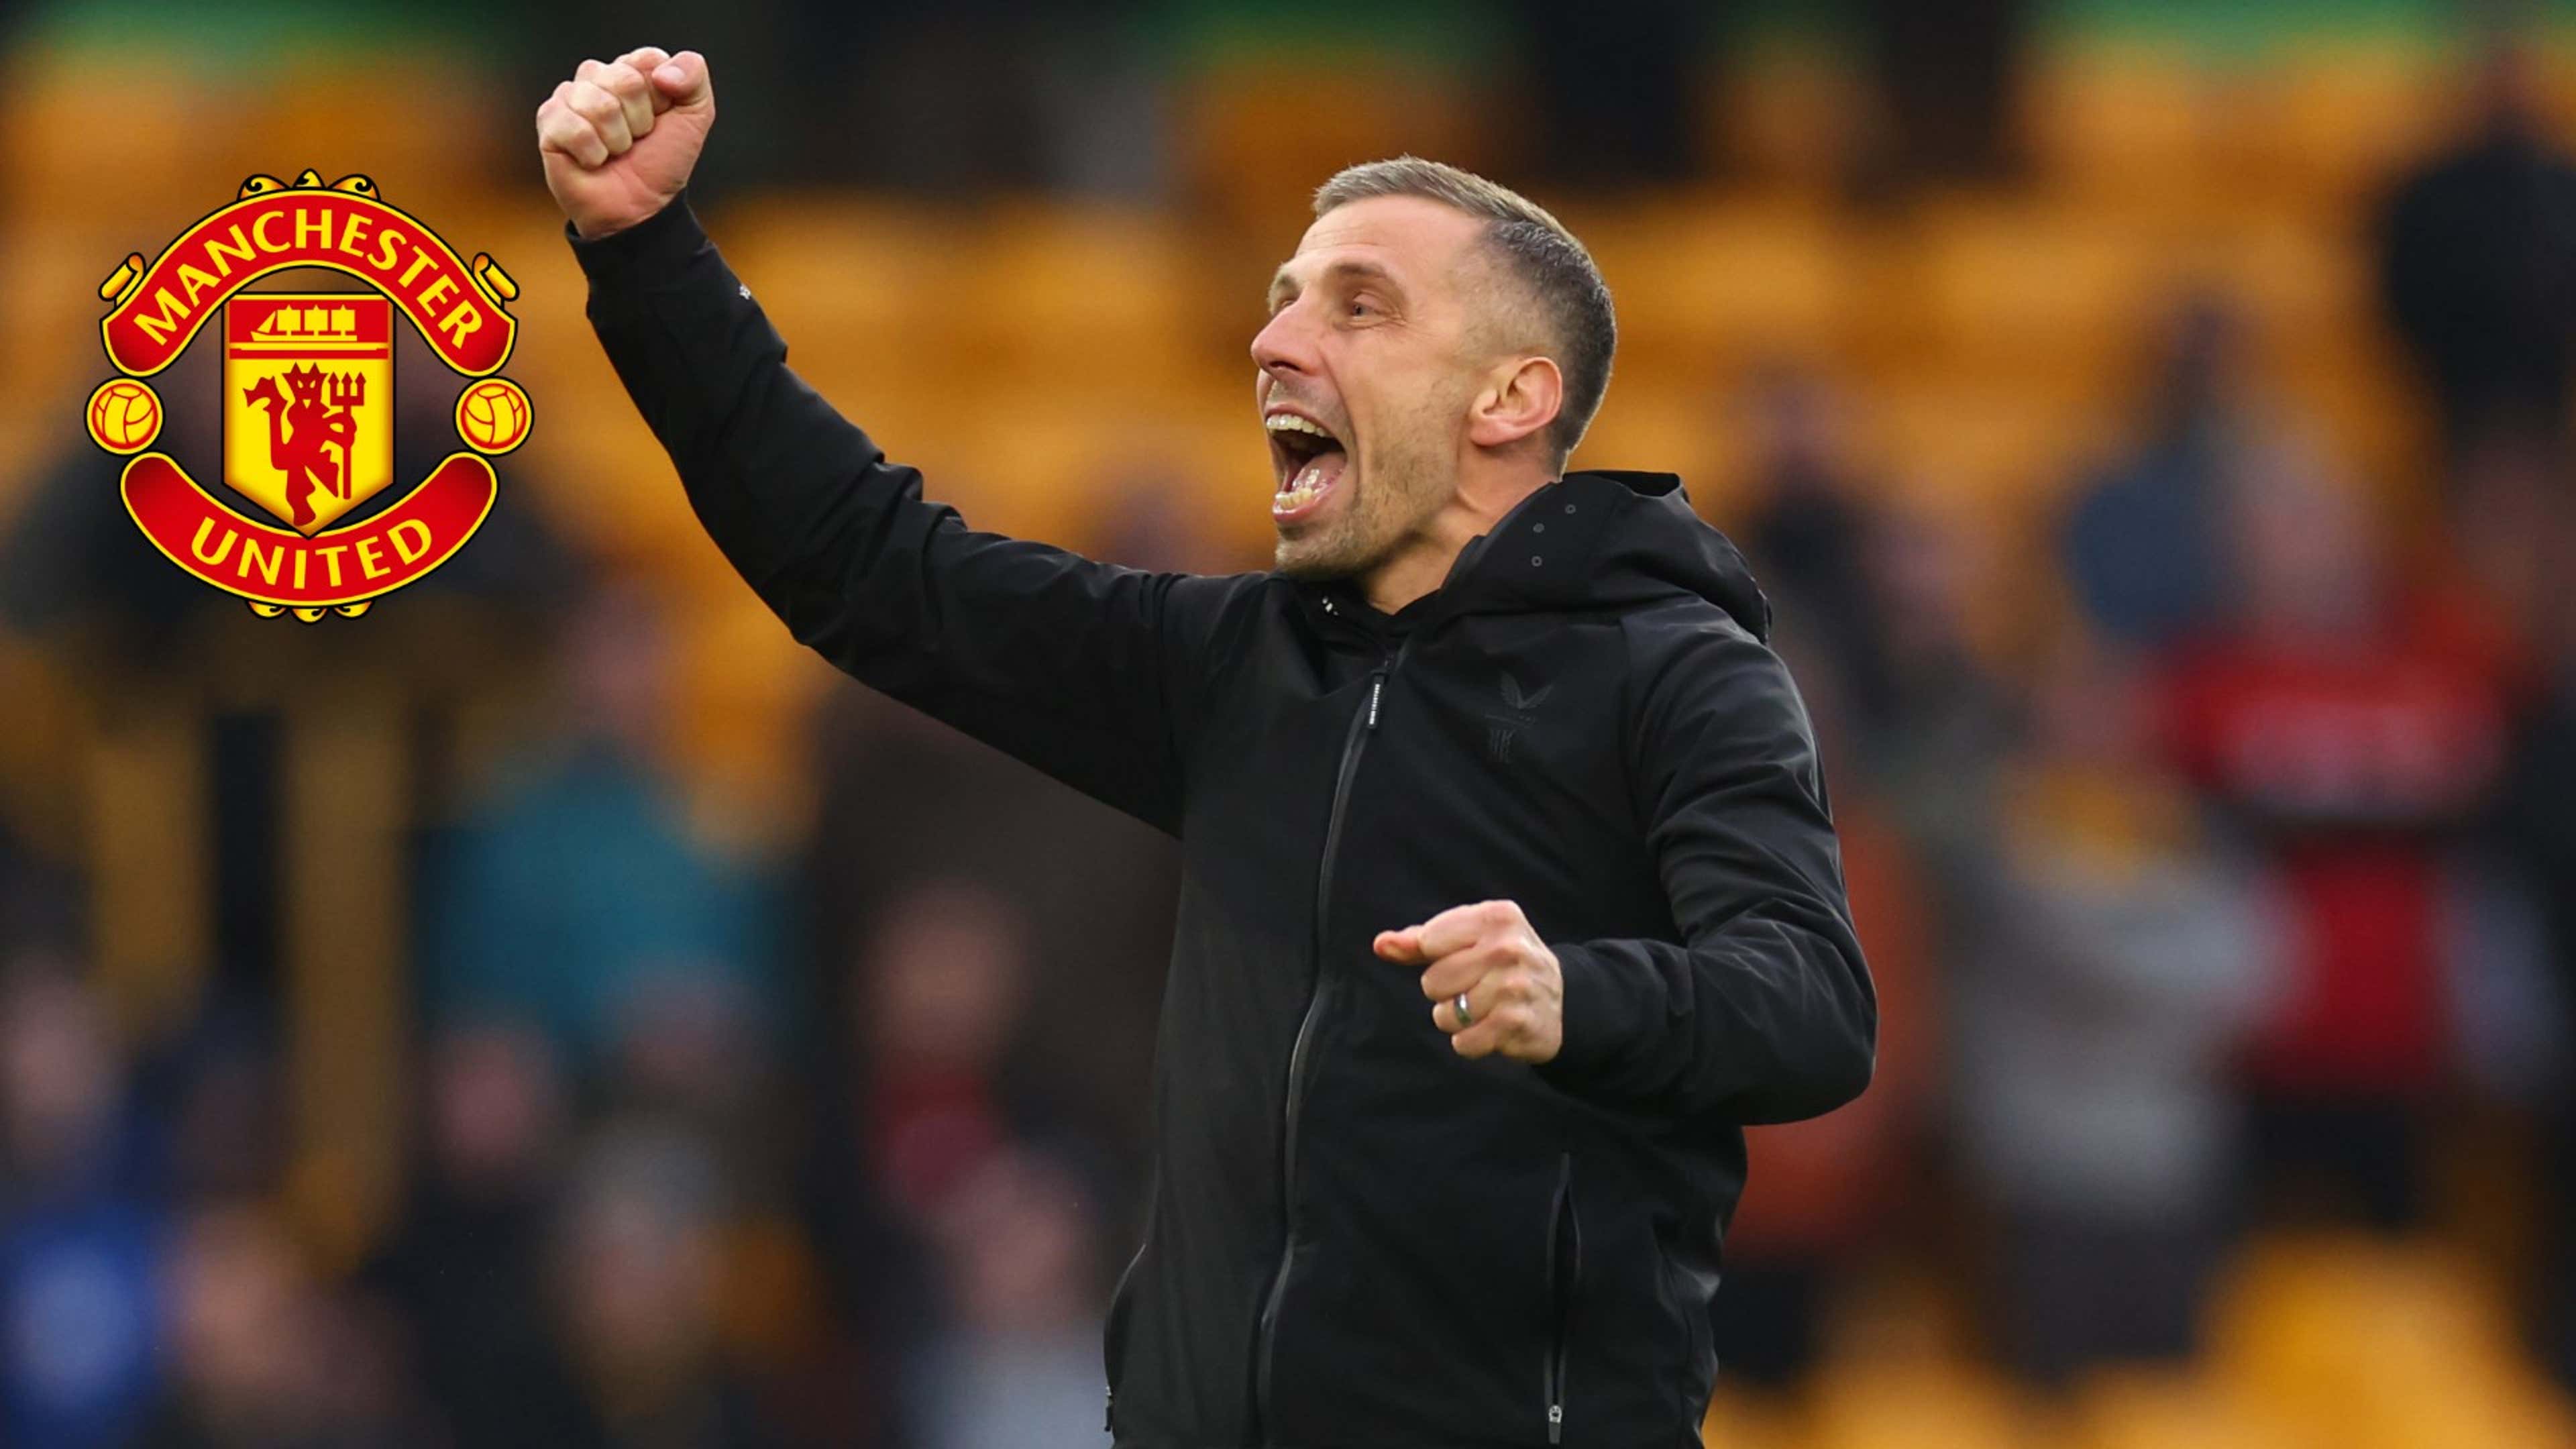 Wolves boss Gary O'Neil has responded to Manchester United links